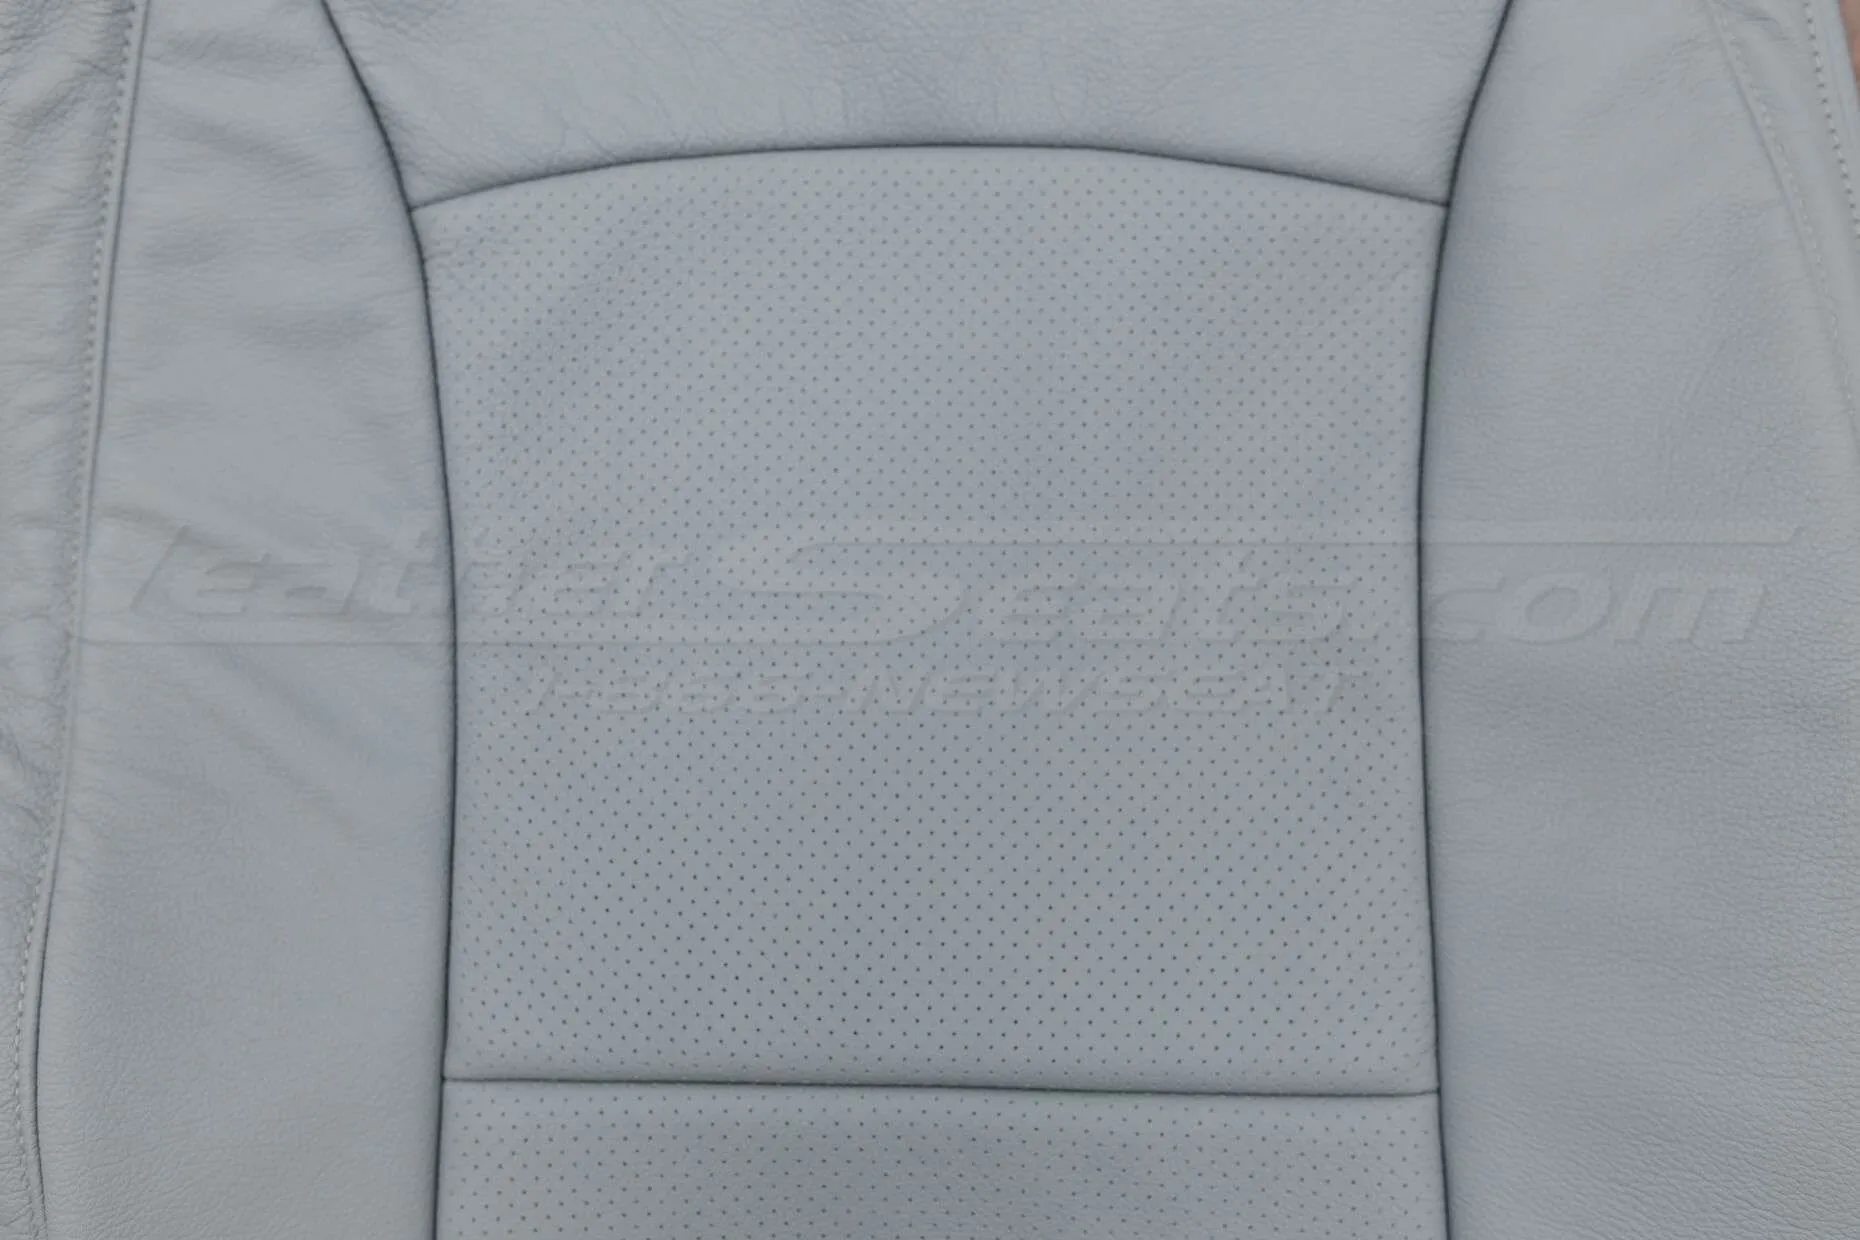 Perforated inserts on backrest